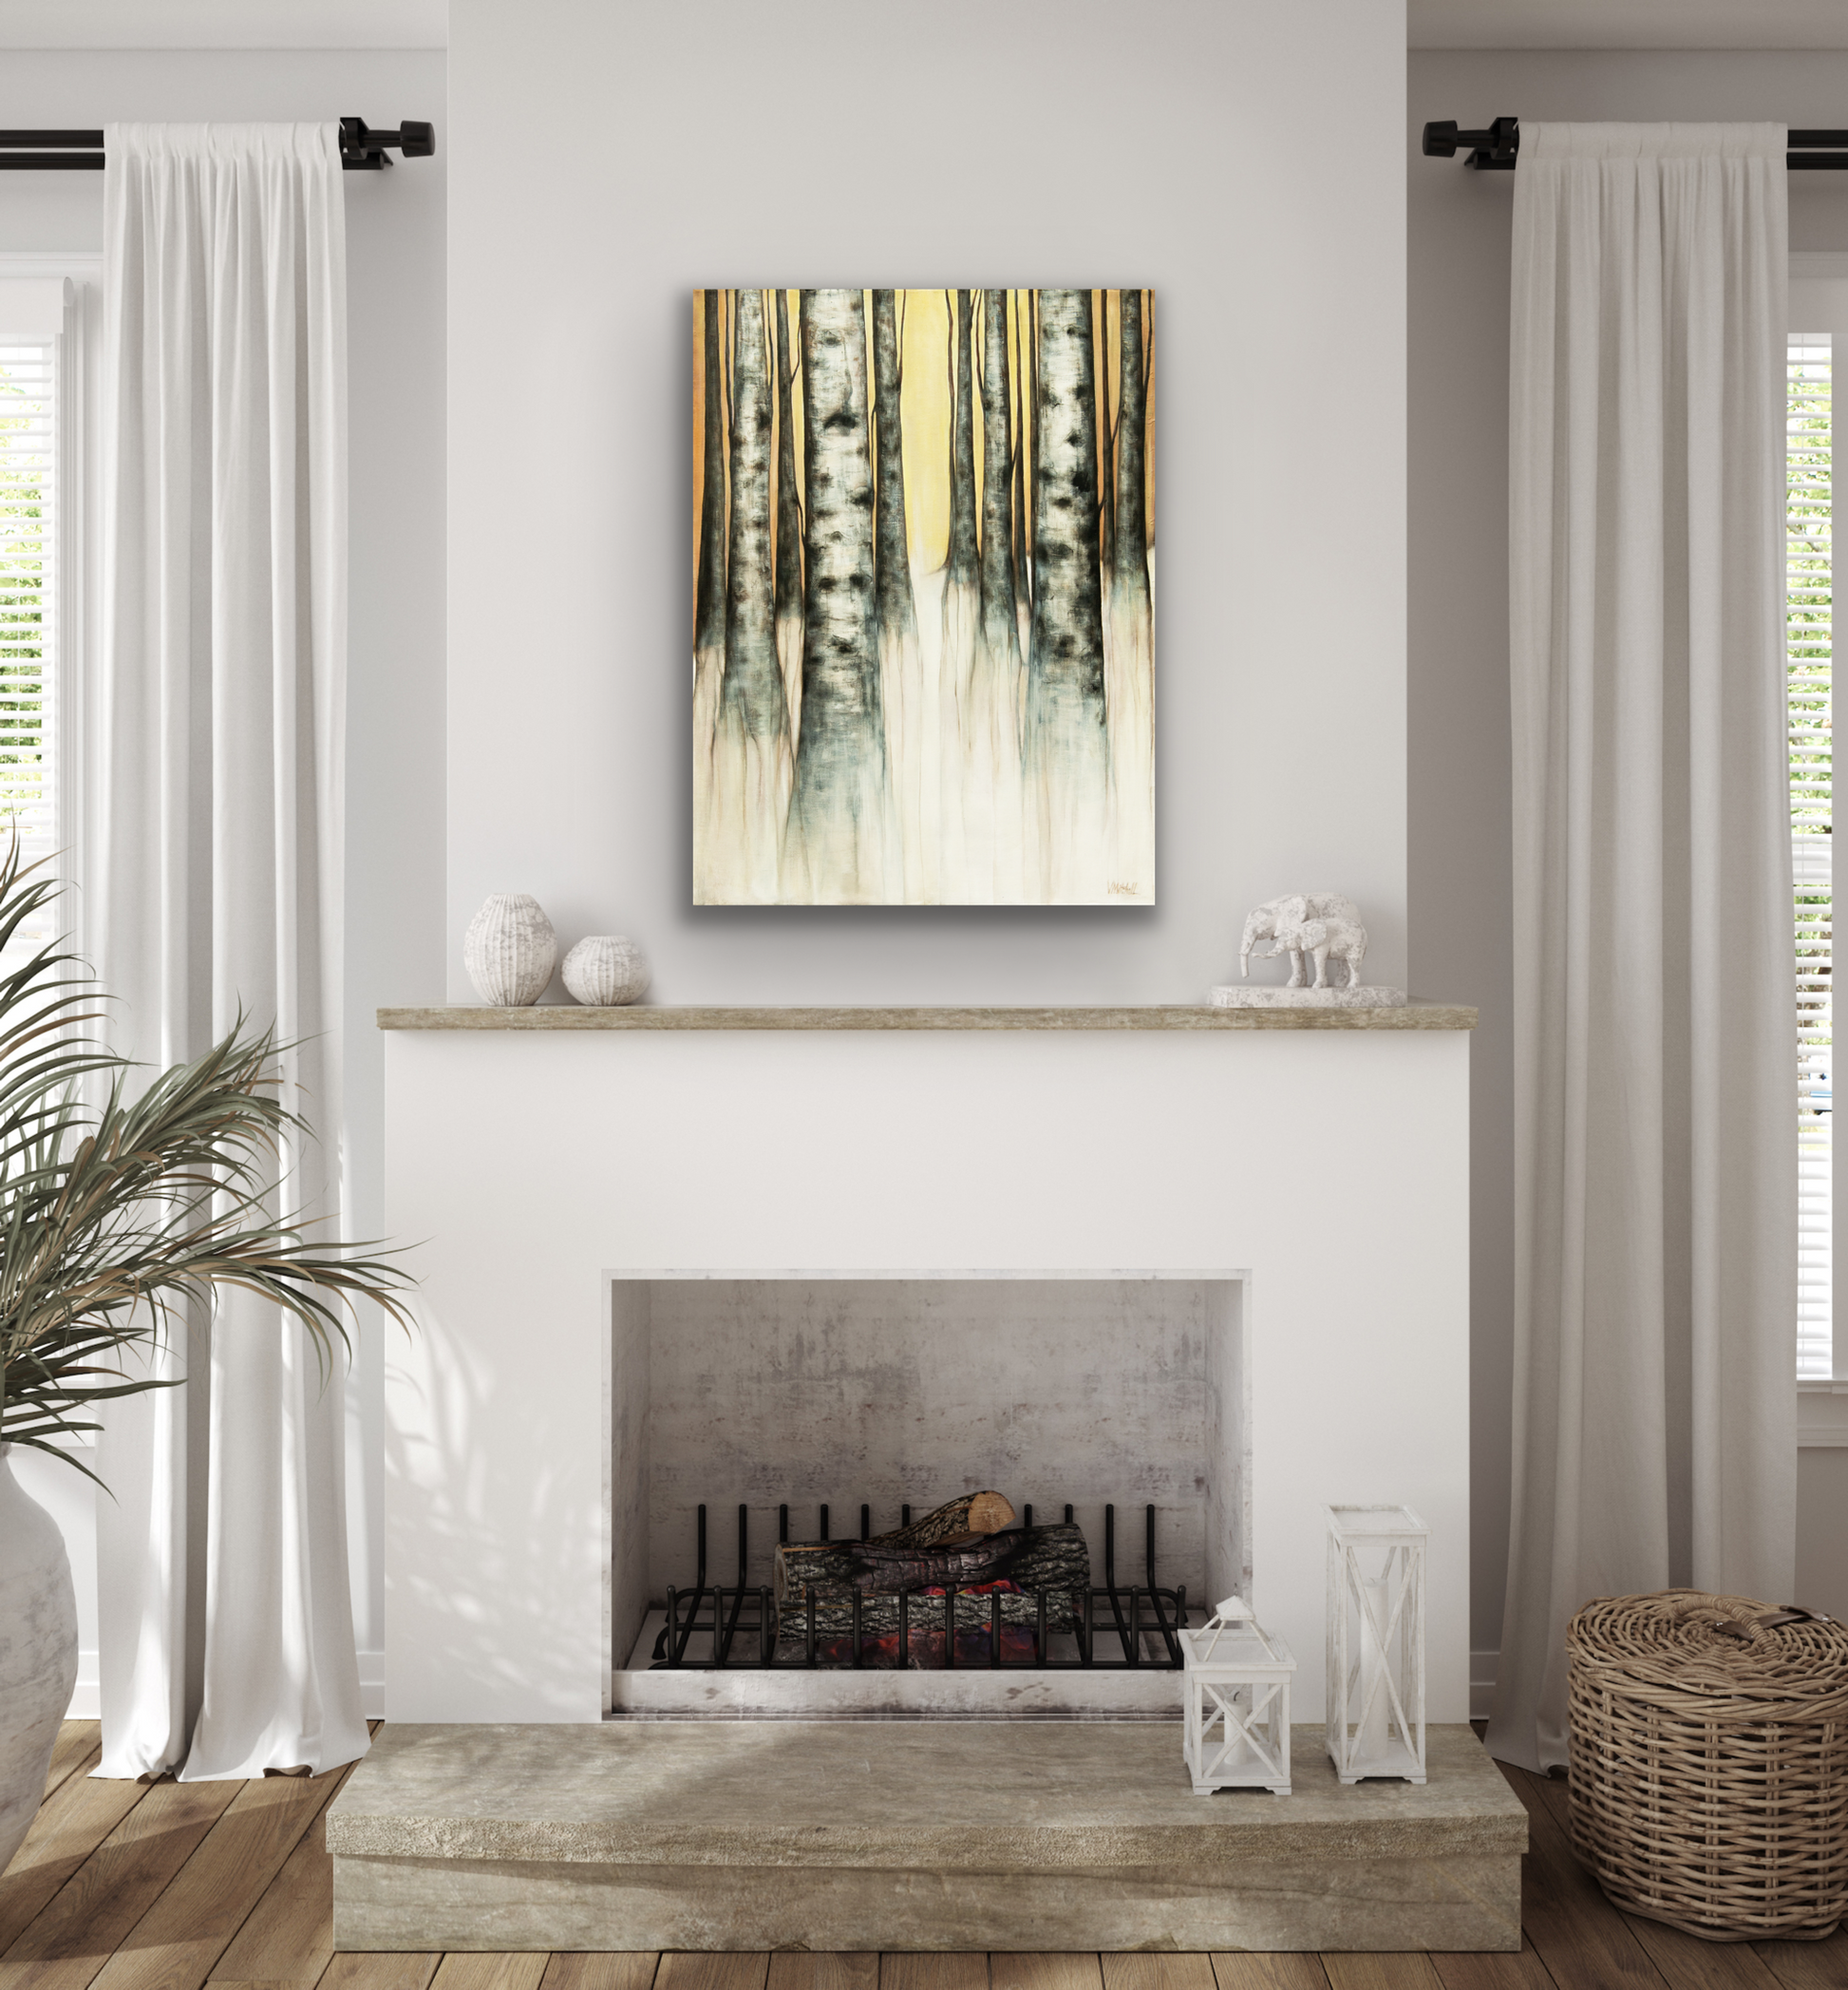 This wall art with it surreal calming natural setting is perfect for bedroom, living room or dining room.